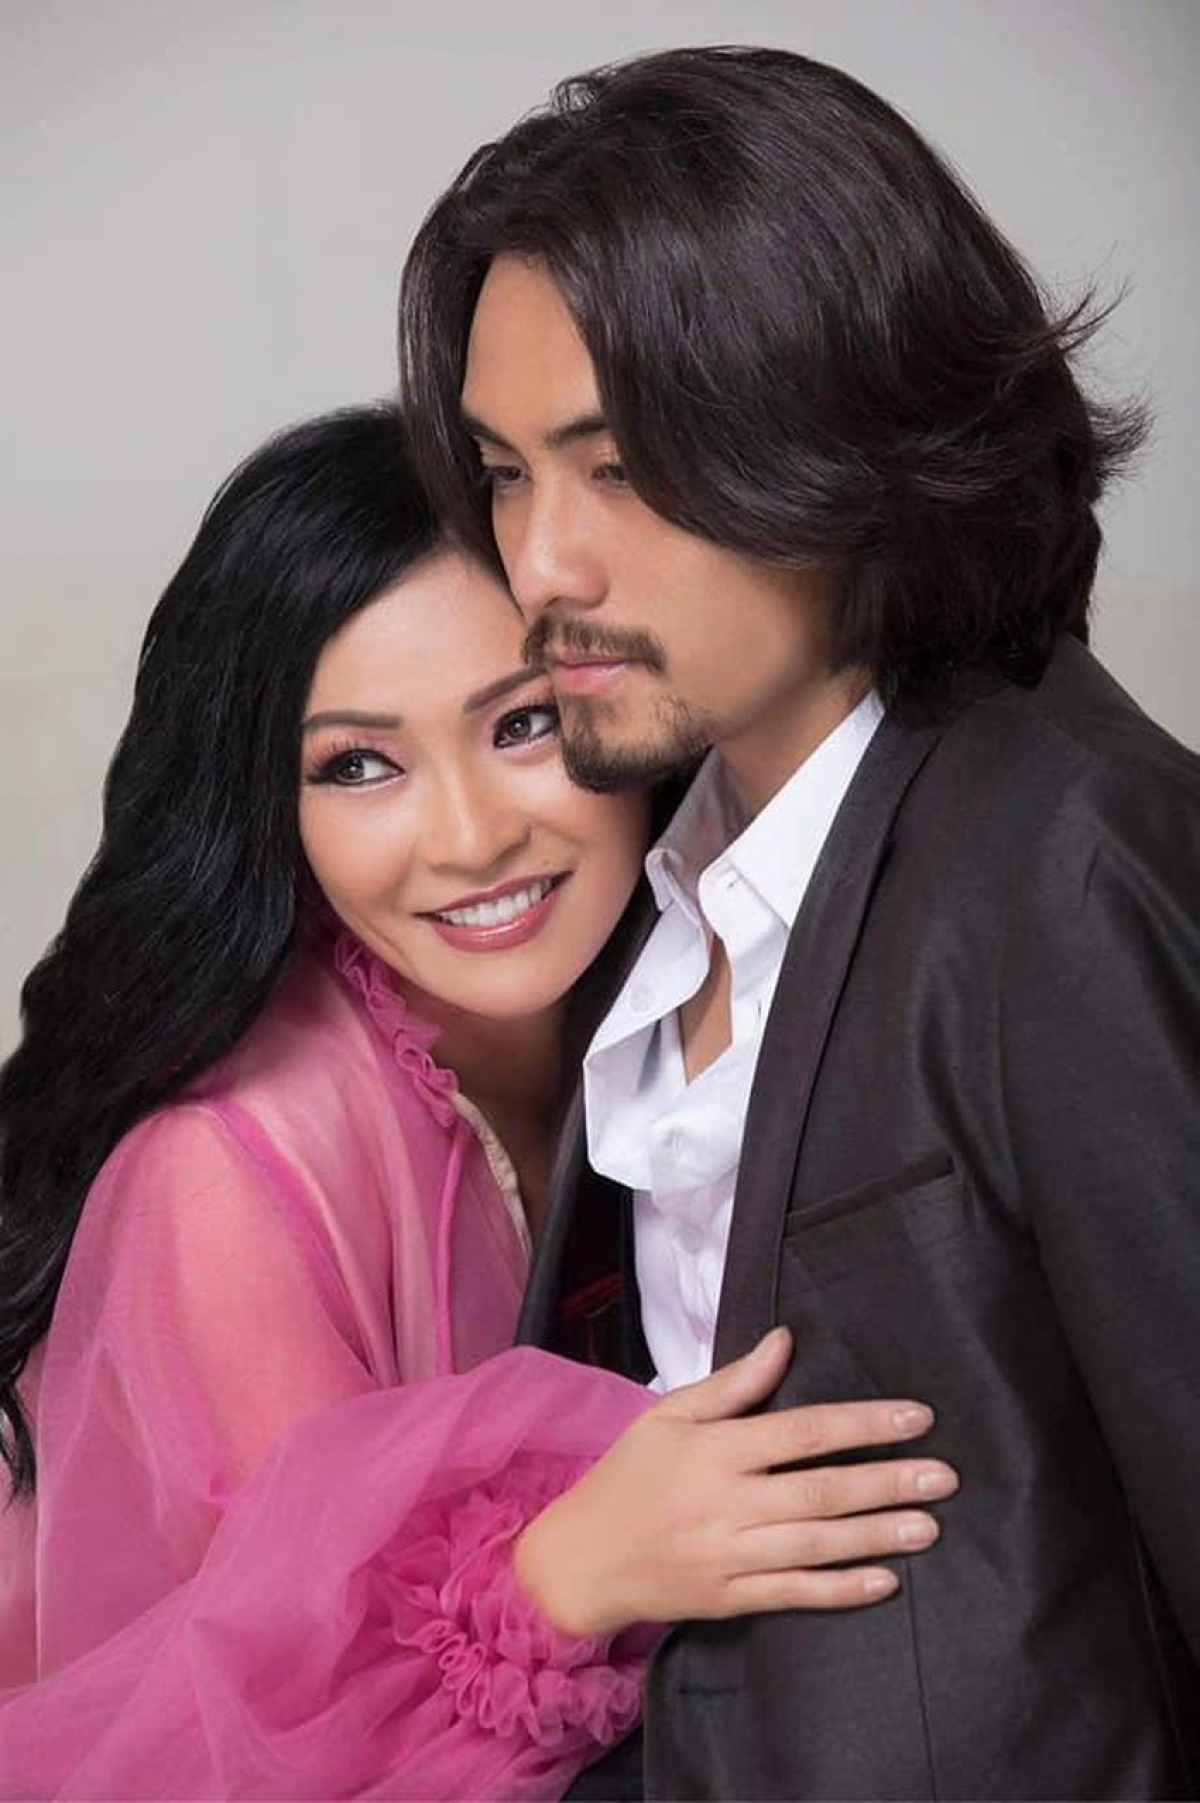 Phuong Thanh - Chi Kien and the turbulent sisters' love affairs of Vietnamese showbiz - Photo 2.